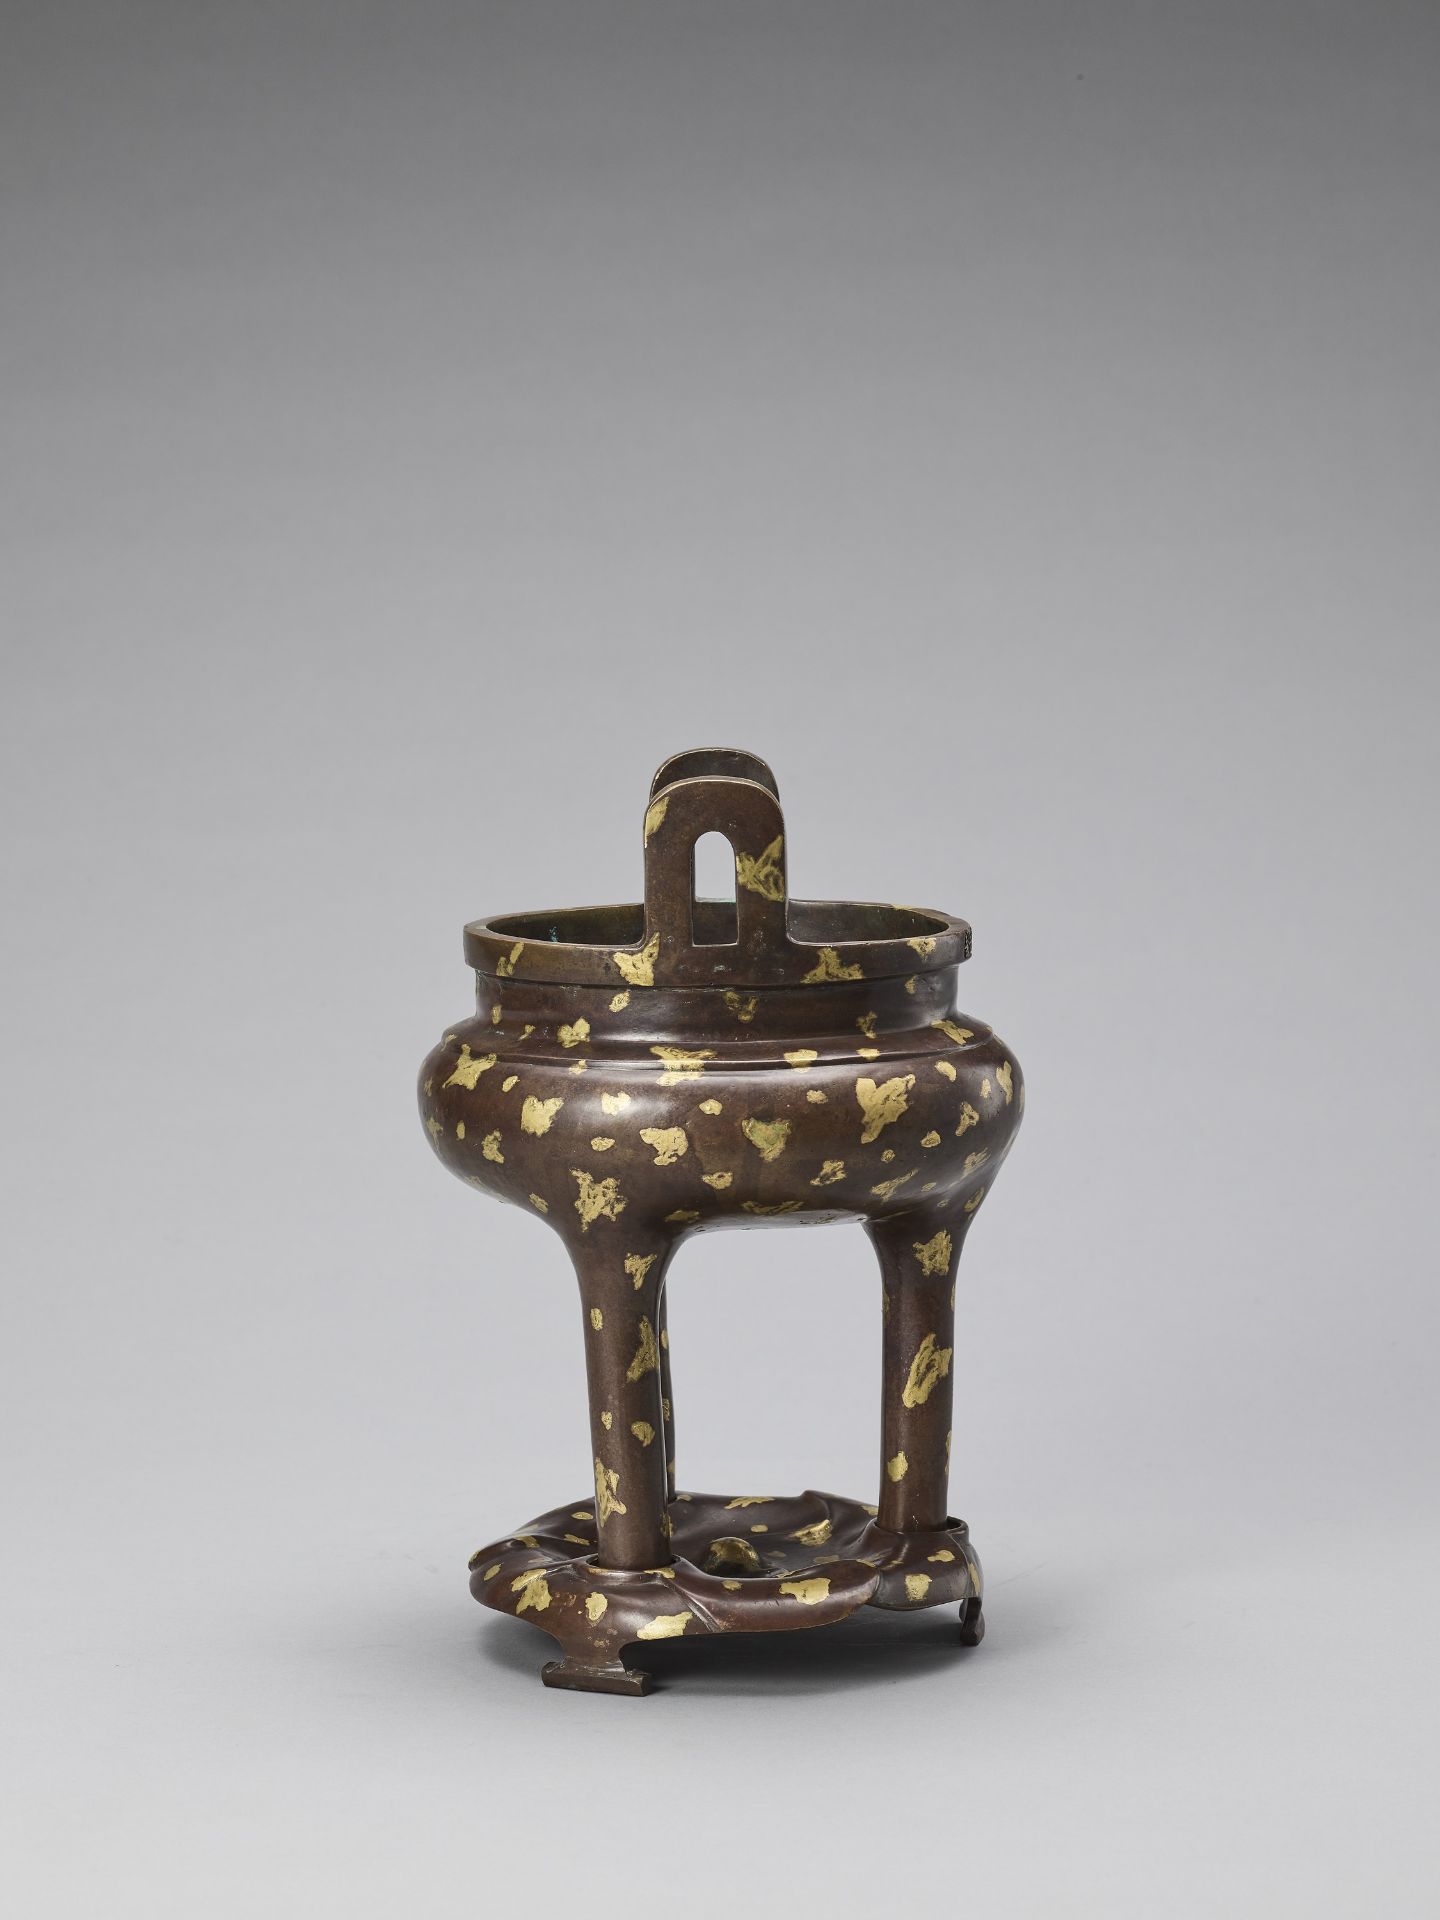 A GOLD-SPLASHED BRONZE TRIPOD CENSER WITH SIX-CHARACTER XUANDE MARK, QING - Image 6 of 8